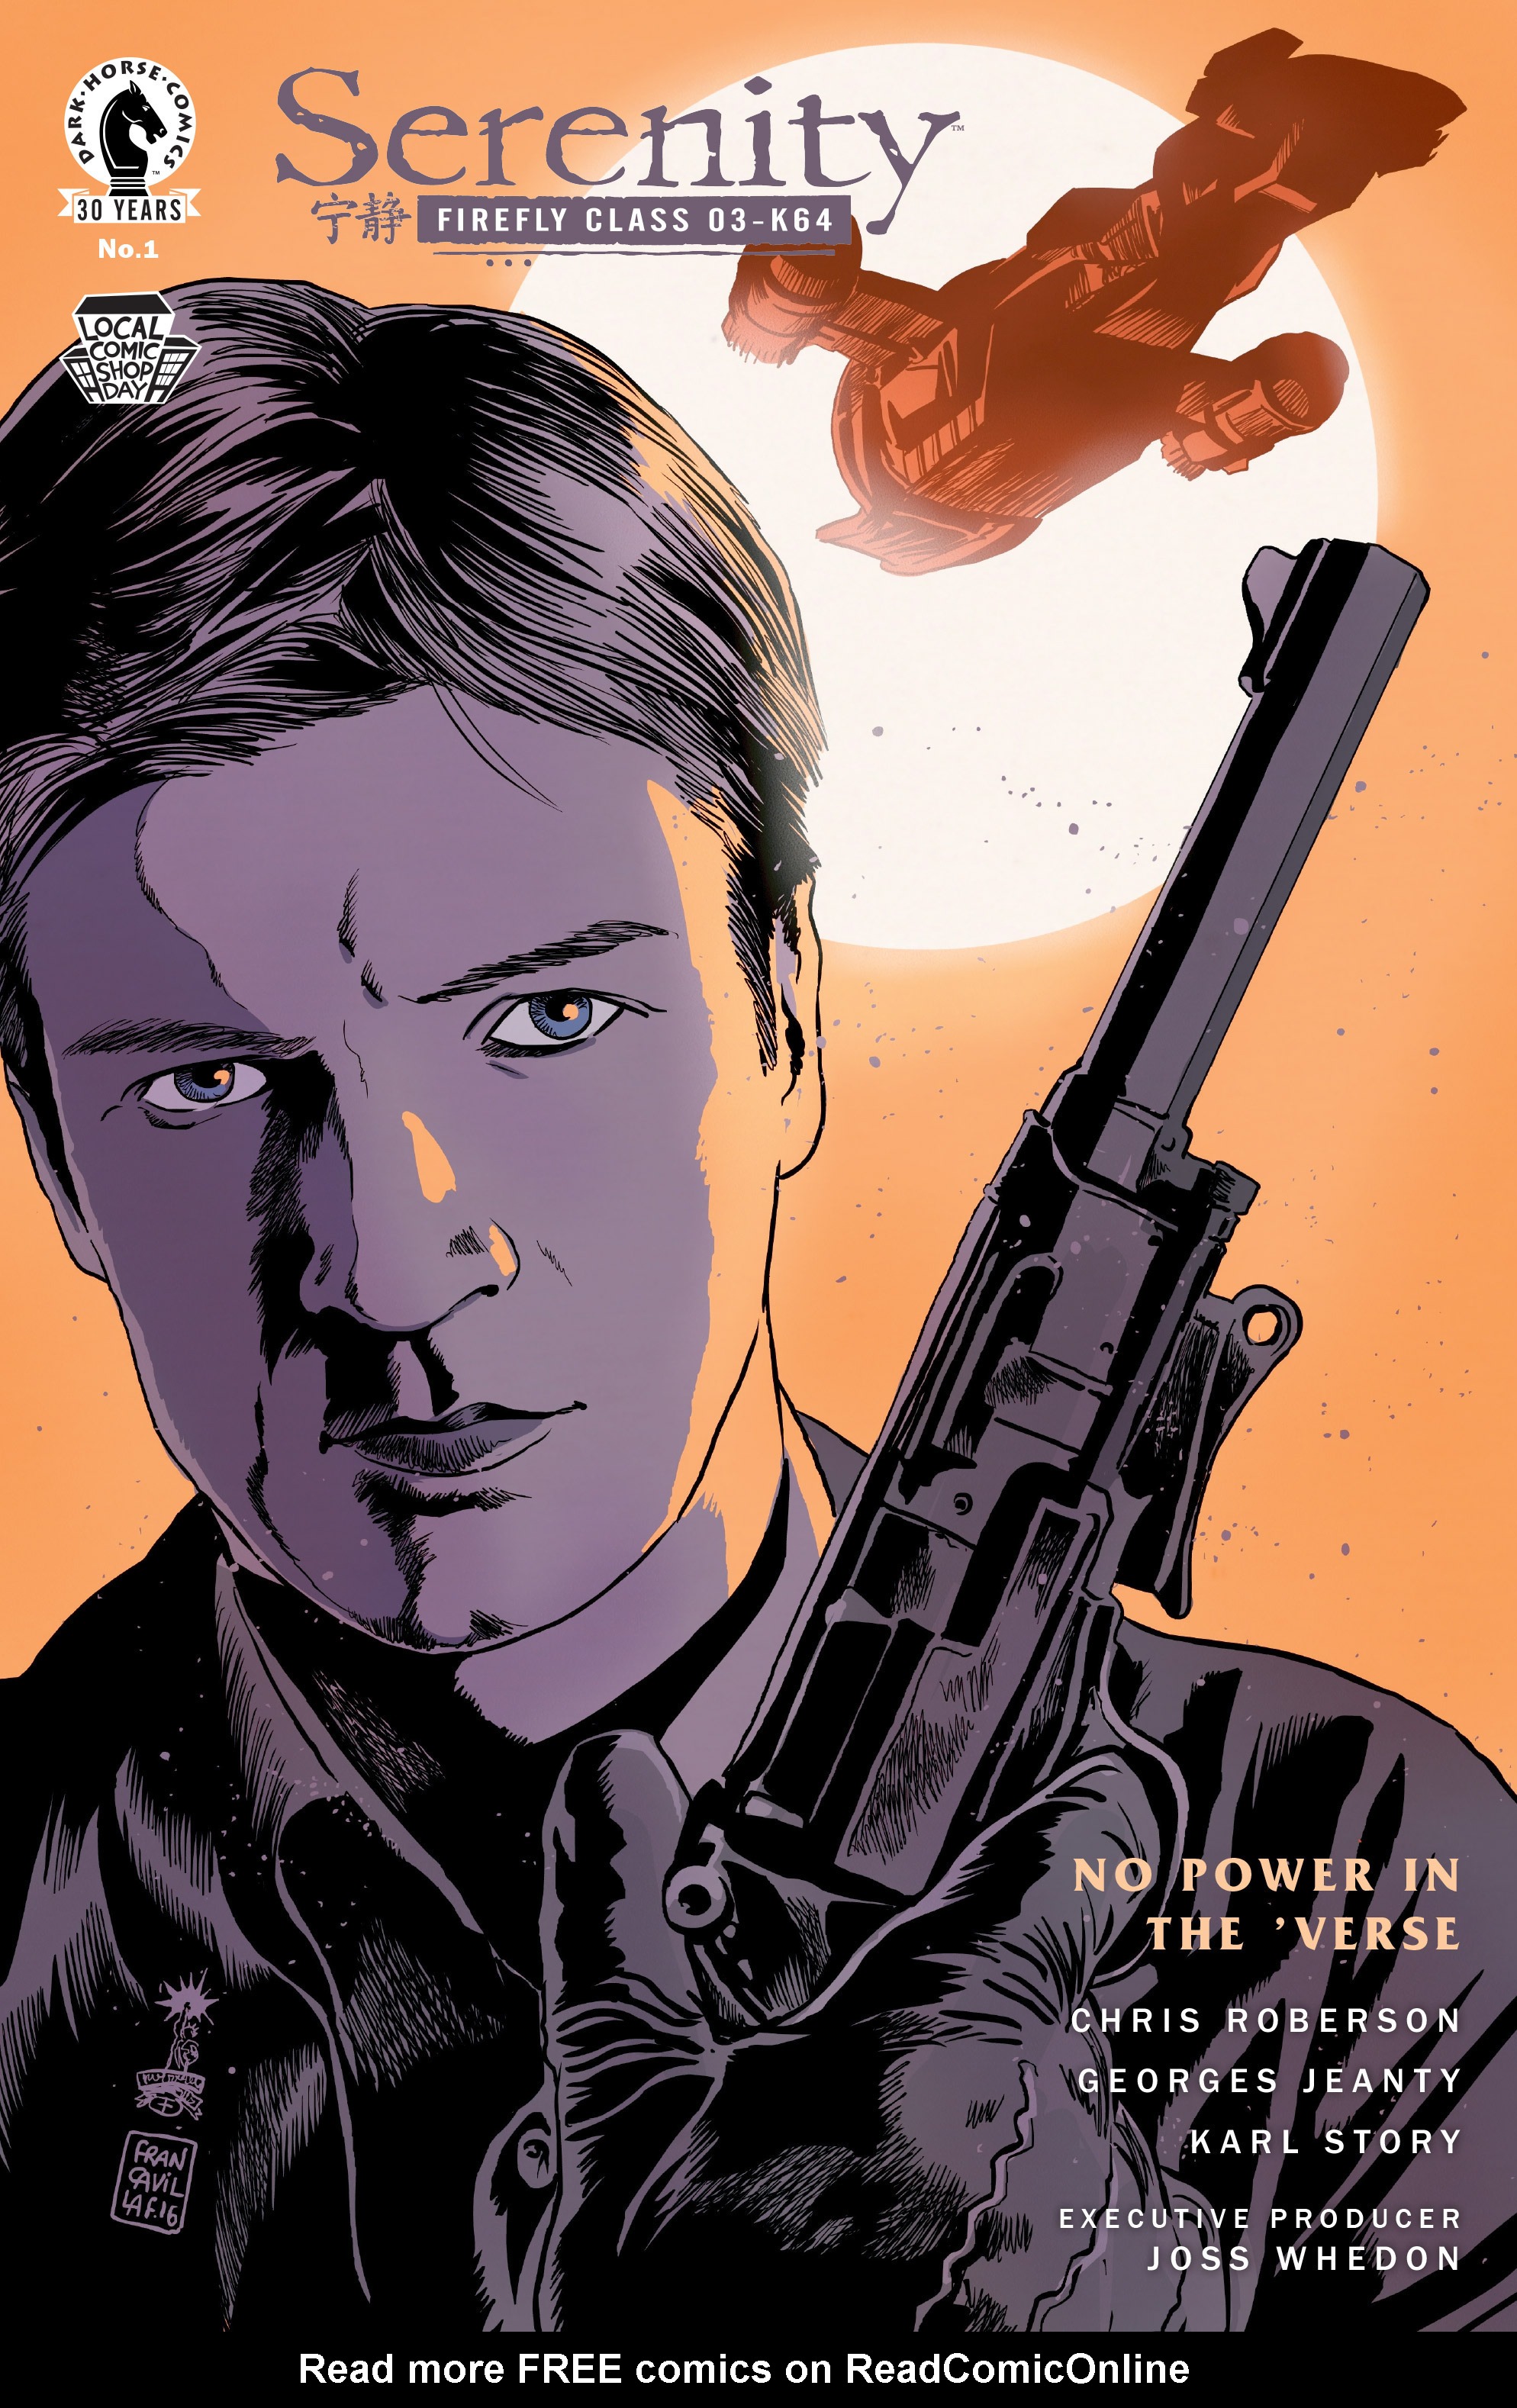 Read online Serenity: Firefly Class 03-K64 – No Power in the 'Verse comic -  Issue #1 - 6